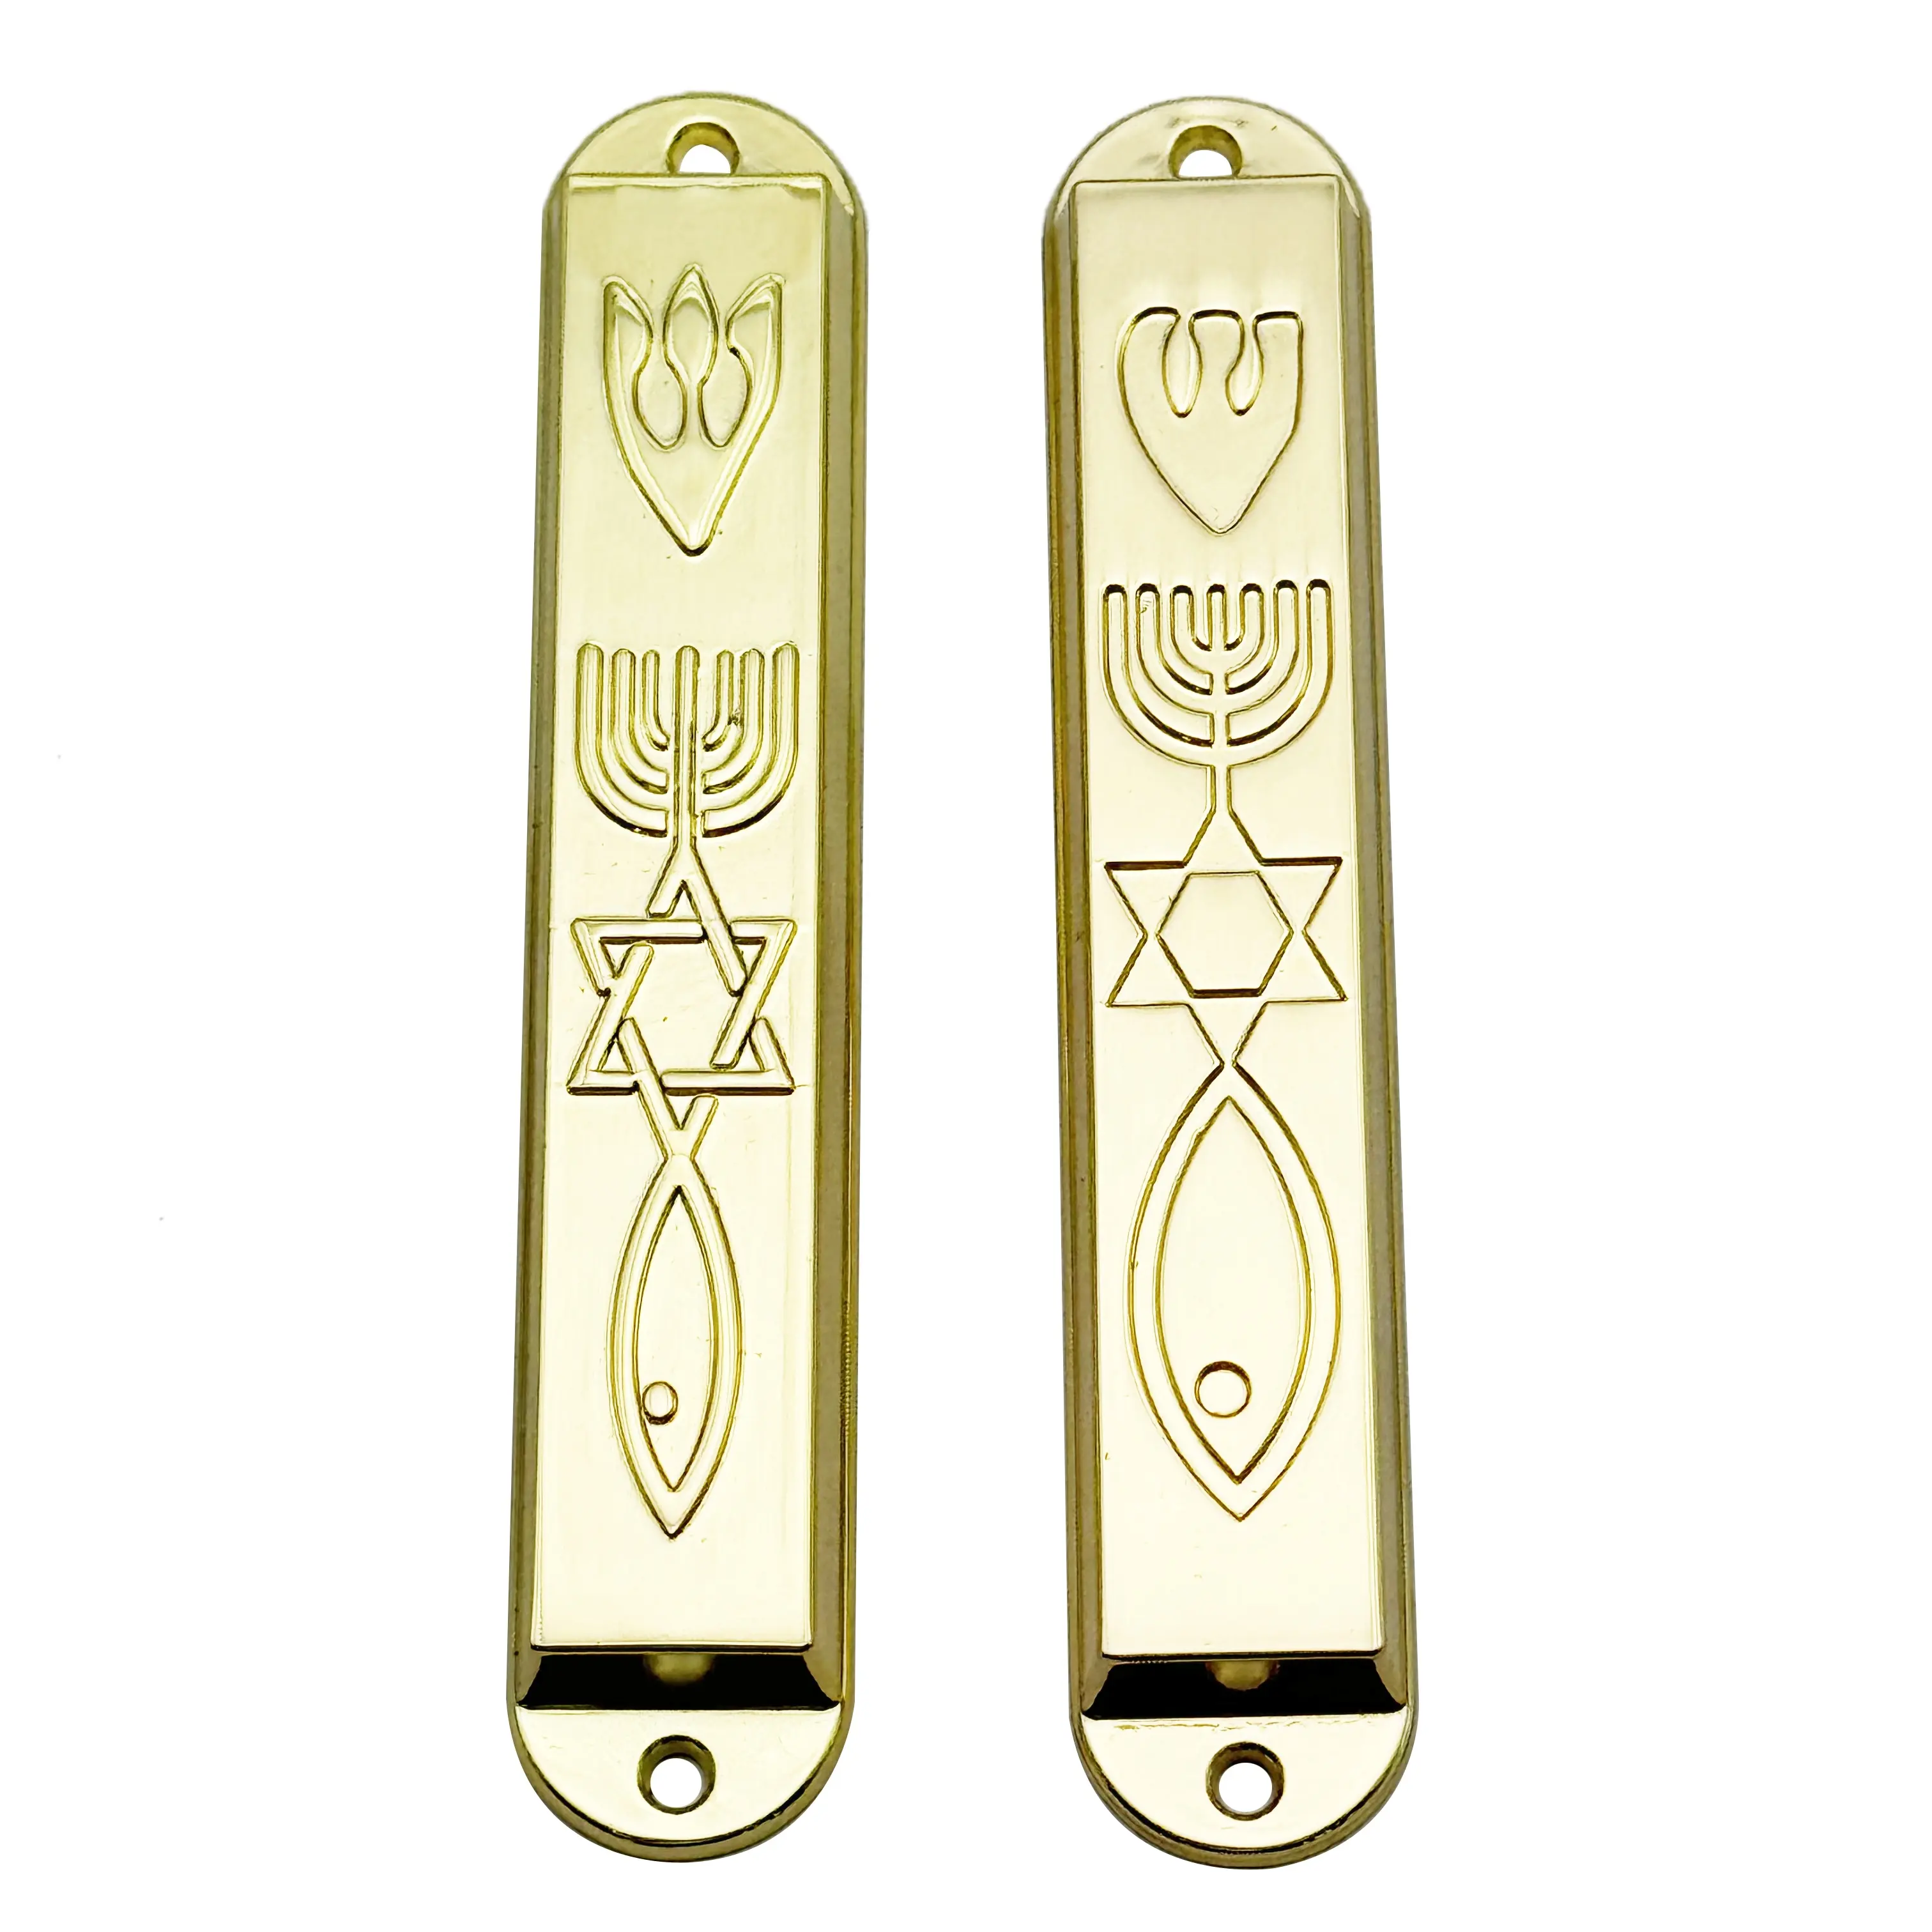 Gold Metal Mezuzah with Letter Shin